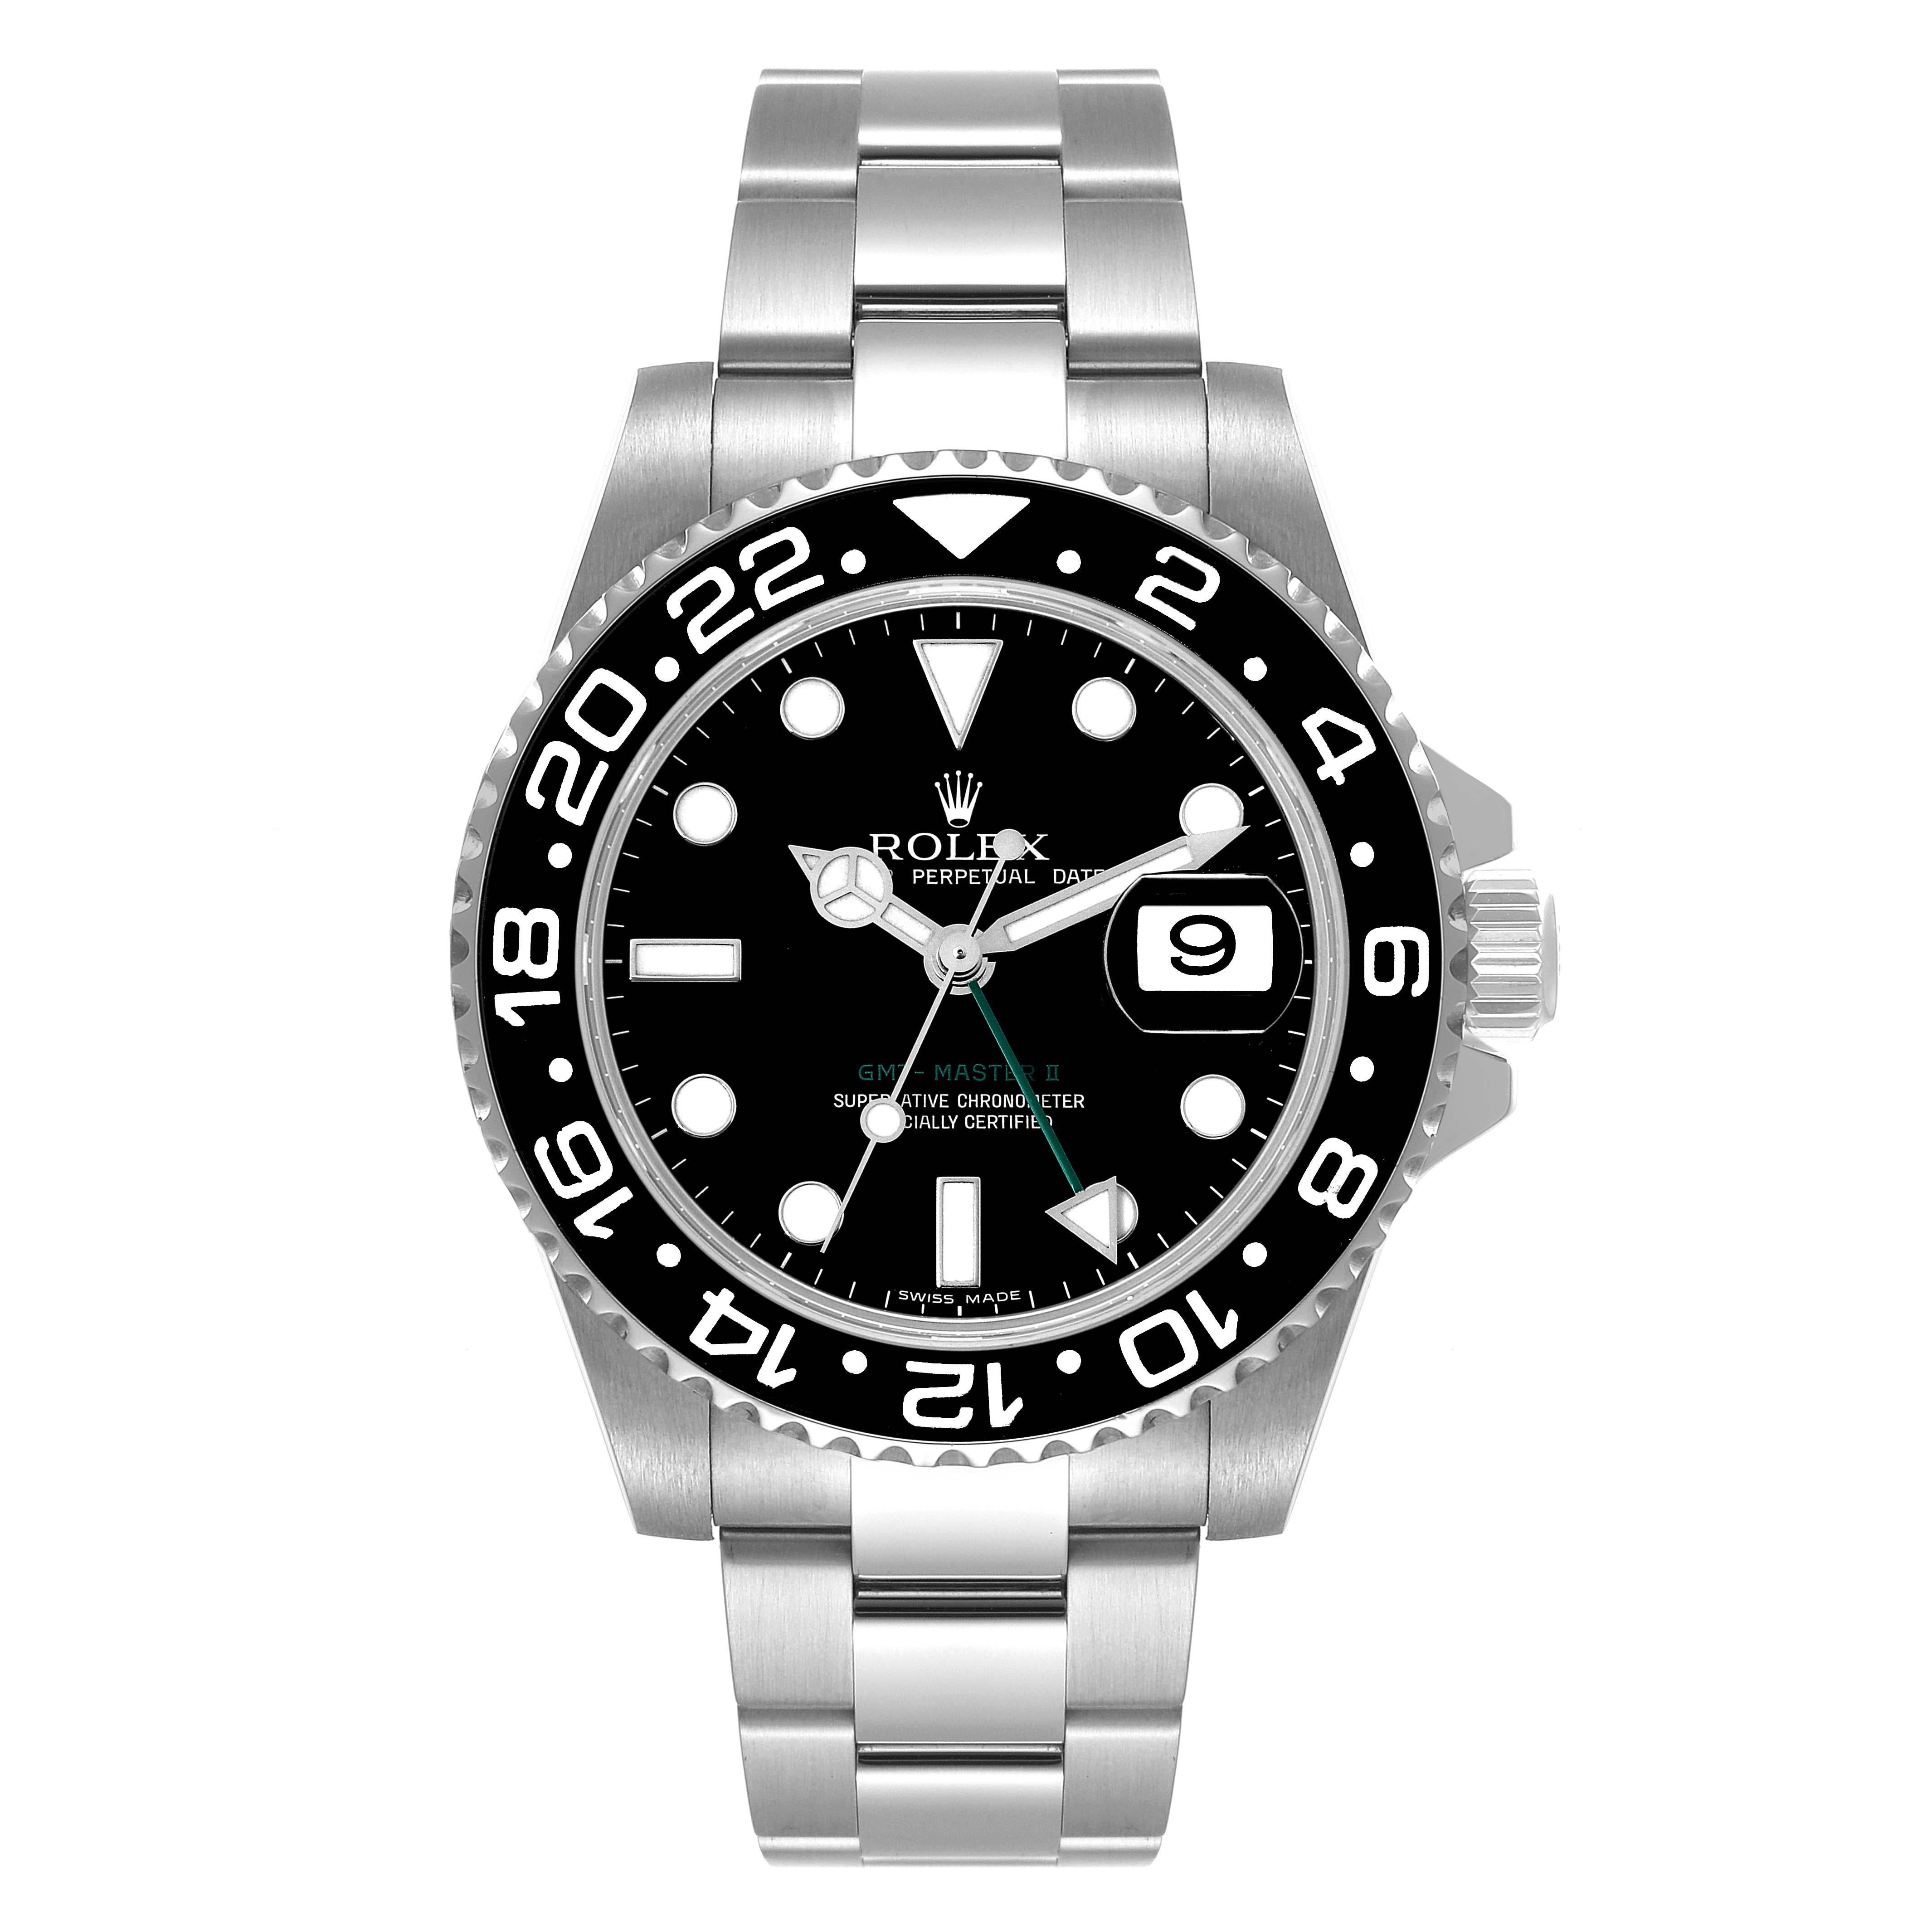 Rolex GMT Master II Black Dial Ceramic Bezel Steel Mens Watch 116710. Officially certified chronometer automatic self-winding movement. Stainless steel case 40.0 mm in diameter. Rolex logo on the crown. Stainless steel bidirectional rotating bezel